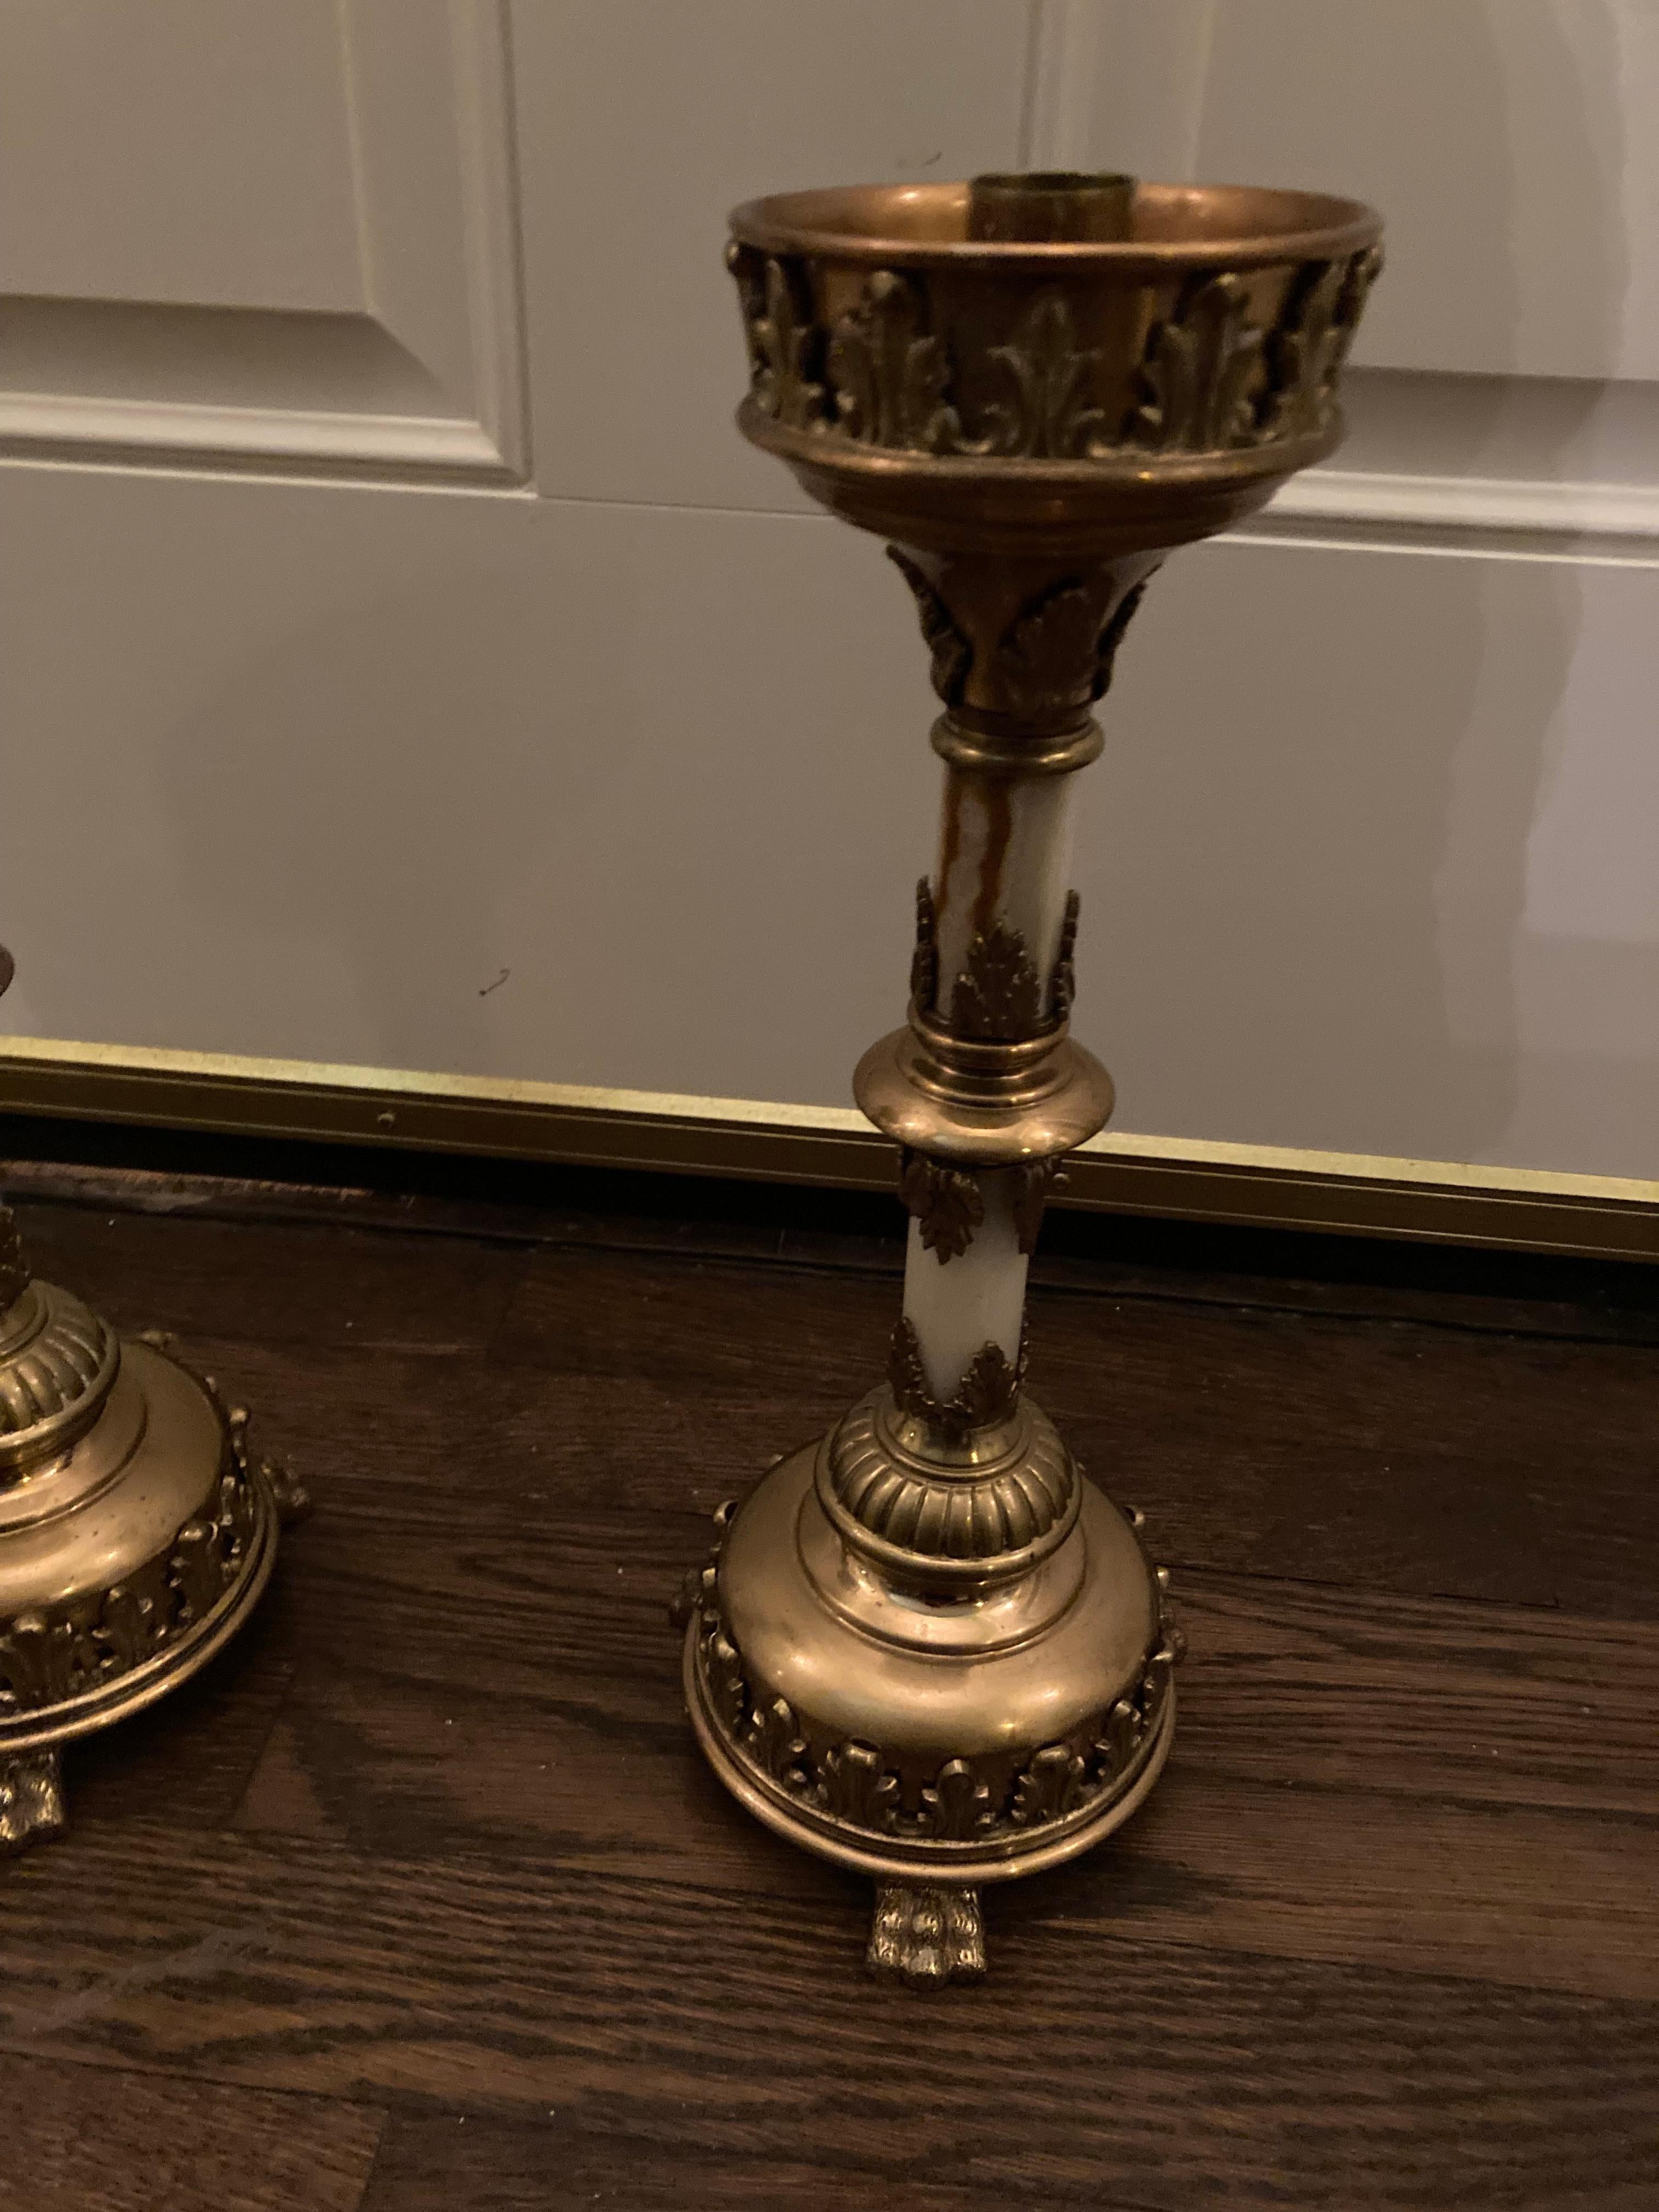 A pair of late 19th century French gilt bronze and agate gothic revival candlesticks. circa 1870-1880
Measures : 5.75 diameter and 13.25 height.
 